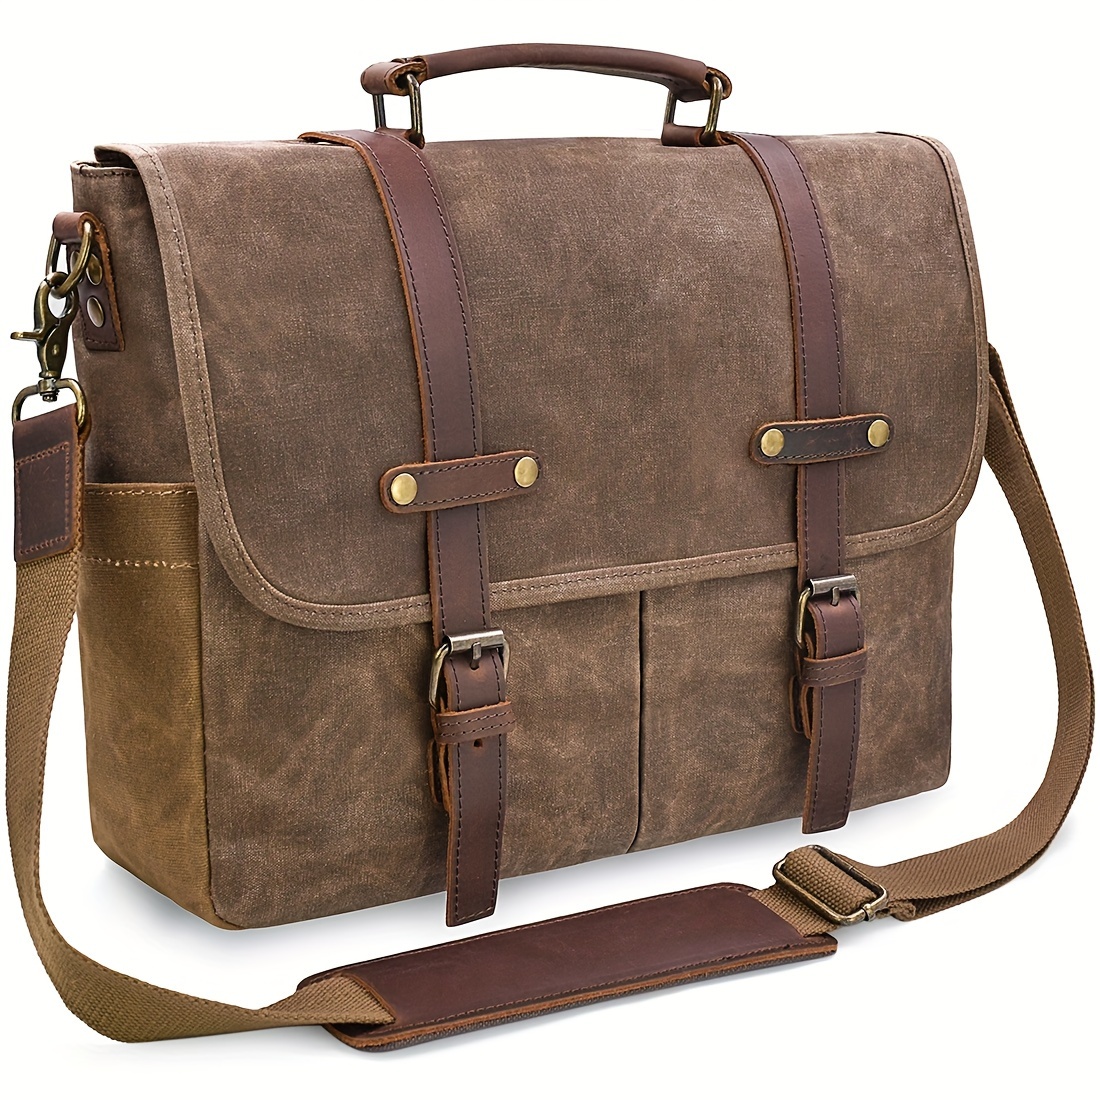 

1pc 15.6-inch Waterproof Vintage Canvas Briefcase, Large Business Laptop Storage Satchel Bag Father's Day Gift